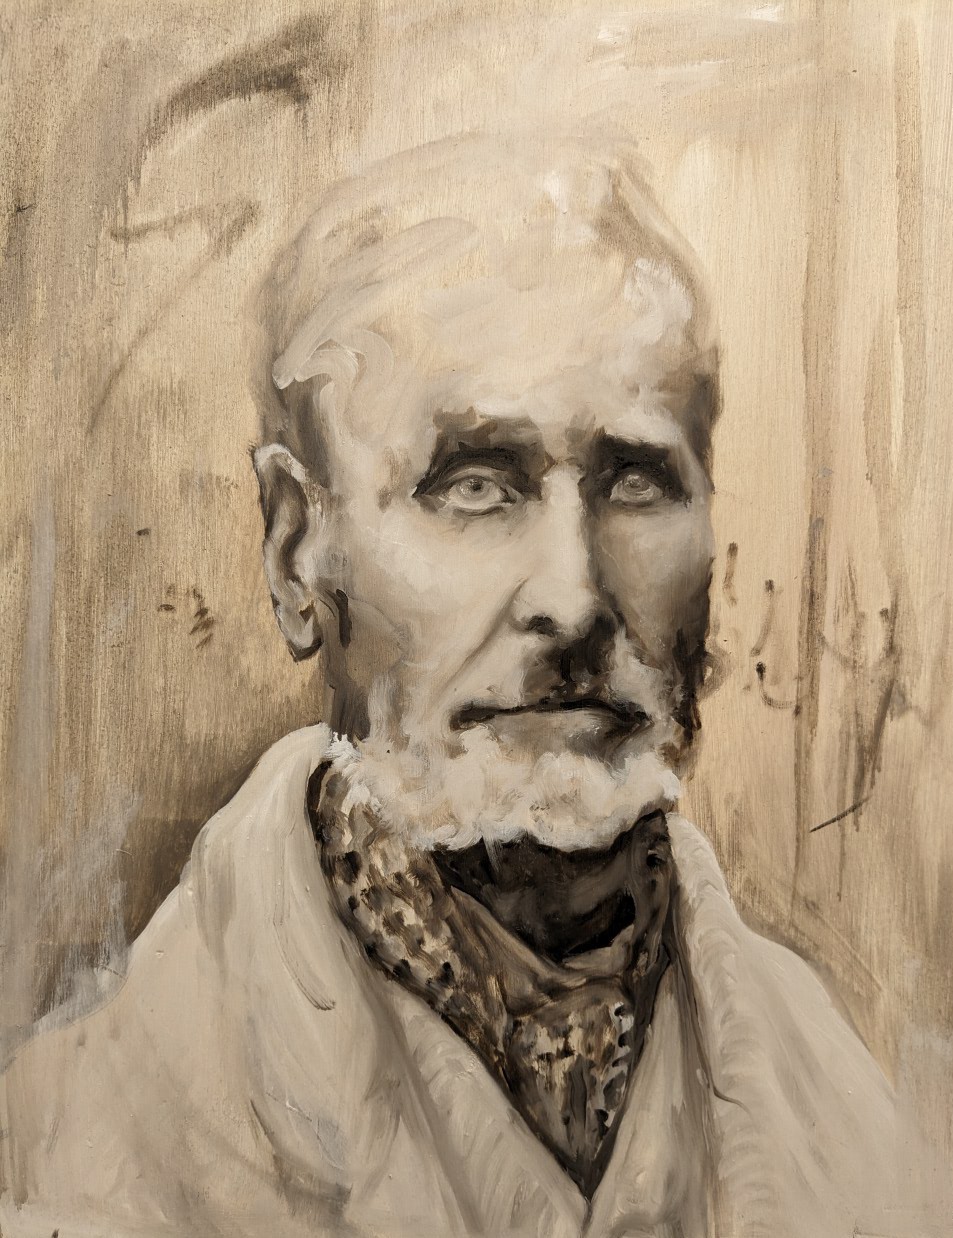 Oil painting by Laurie Mason showing a portrait of Victorian man